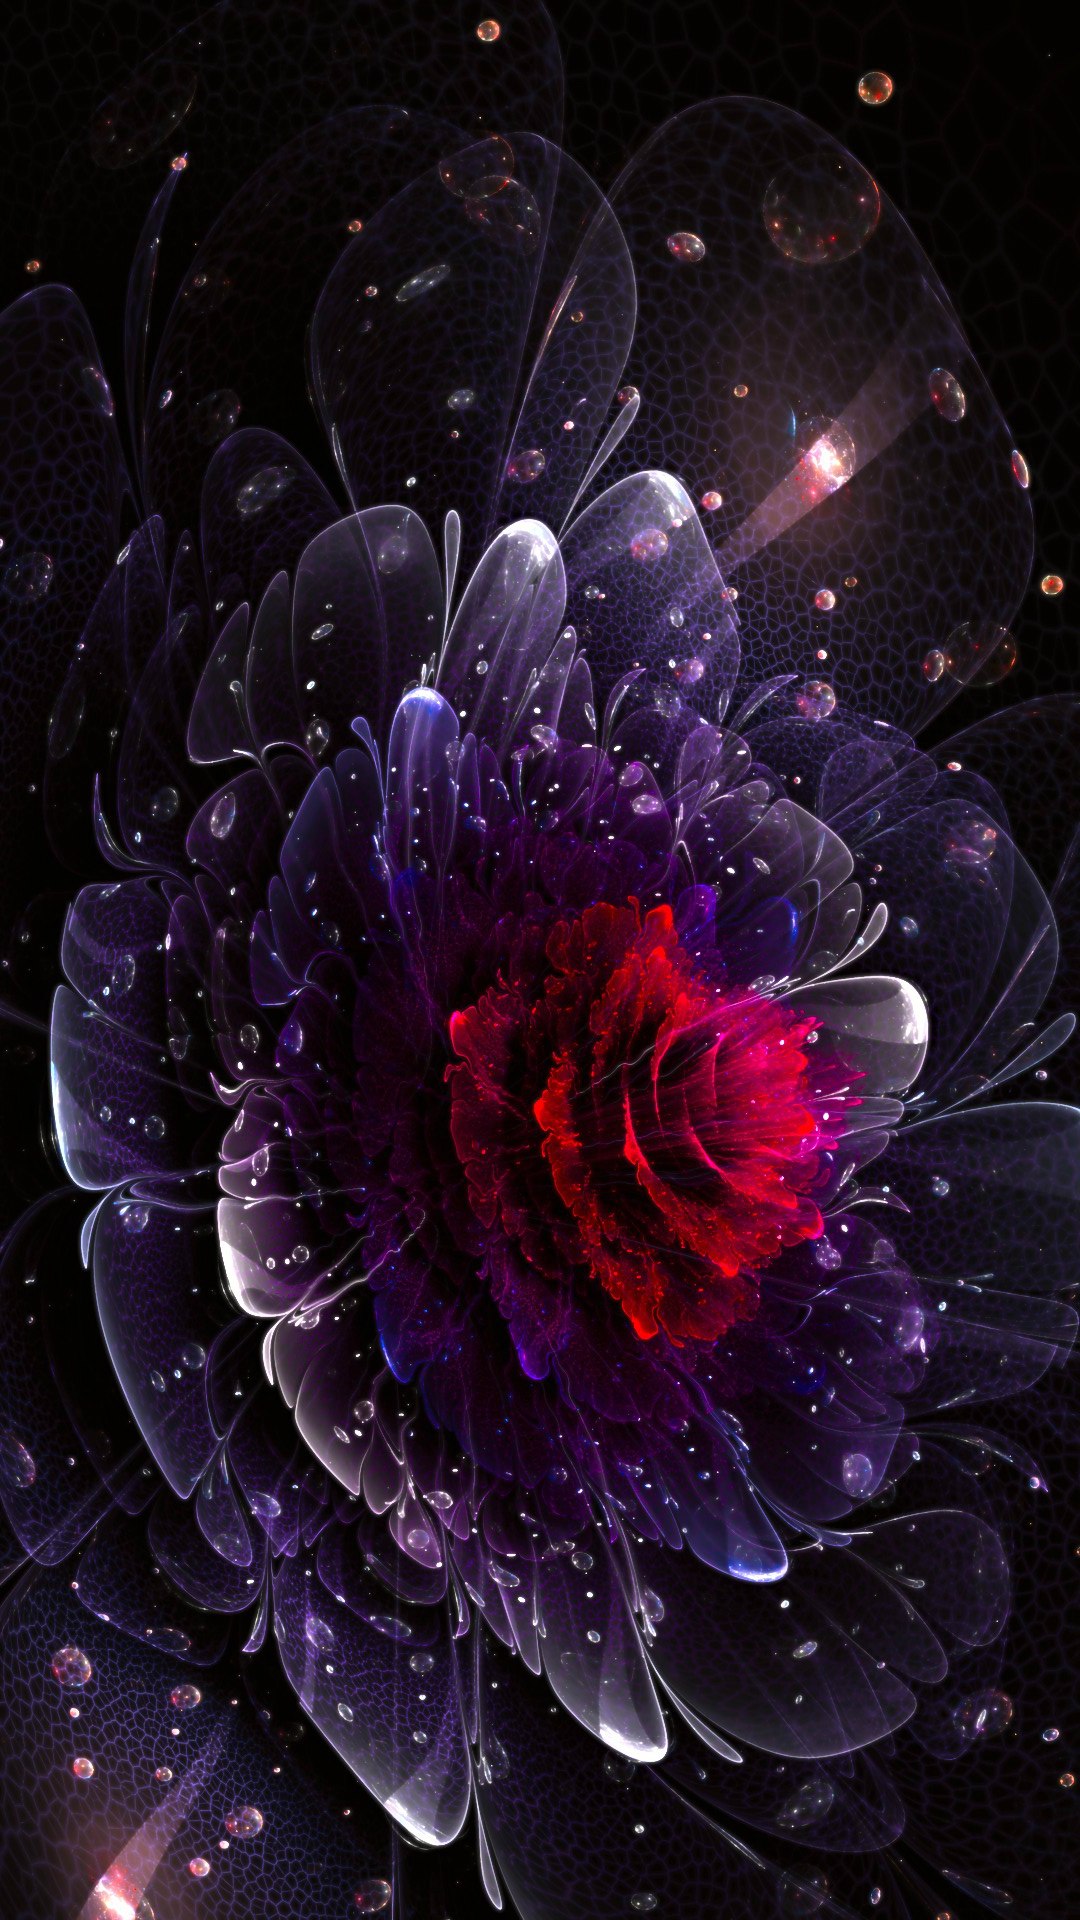 1080x1920 Wallpapers Flower Violet Abstraction Wallpaper 1080x1920 Supportive Guru